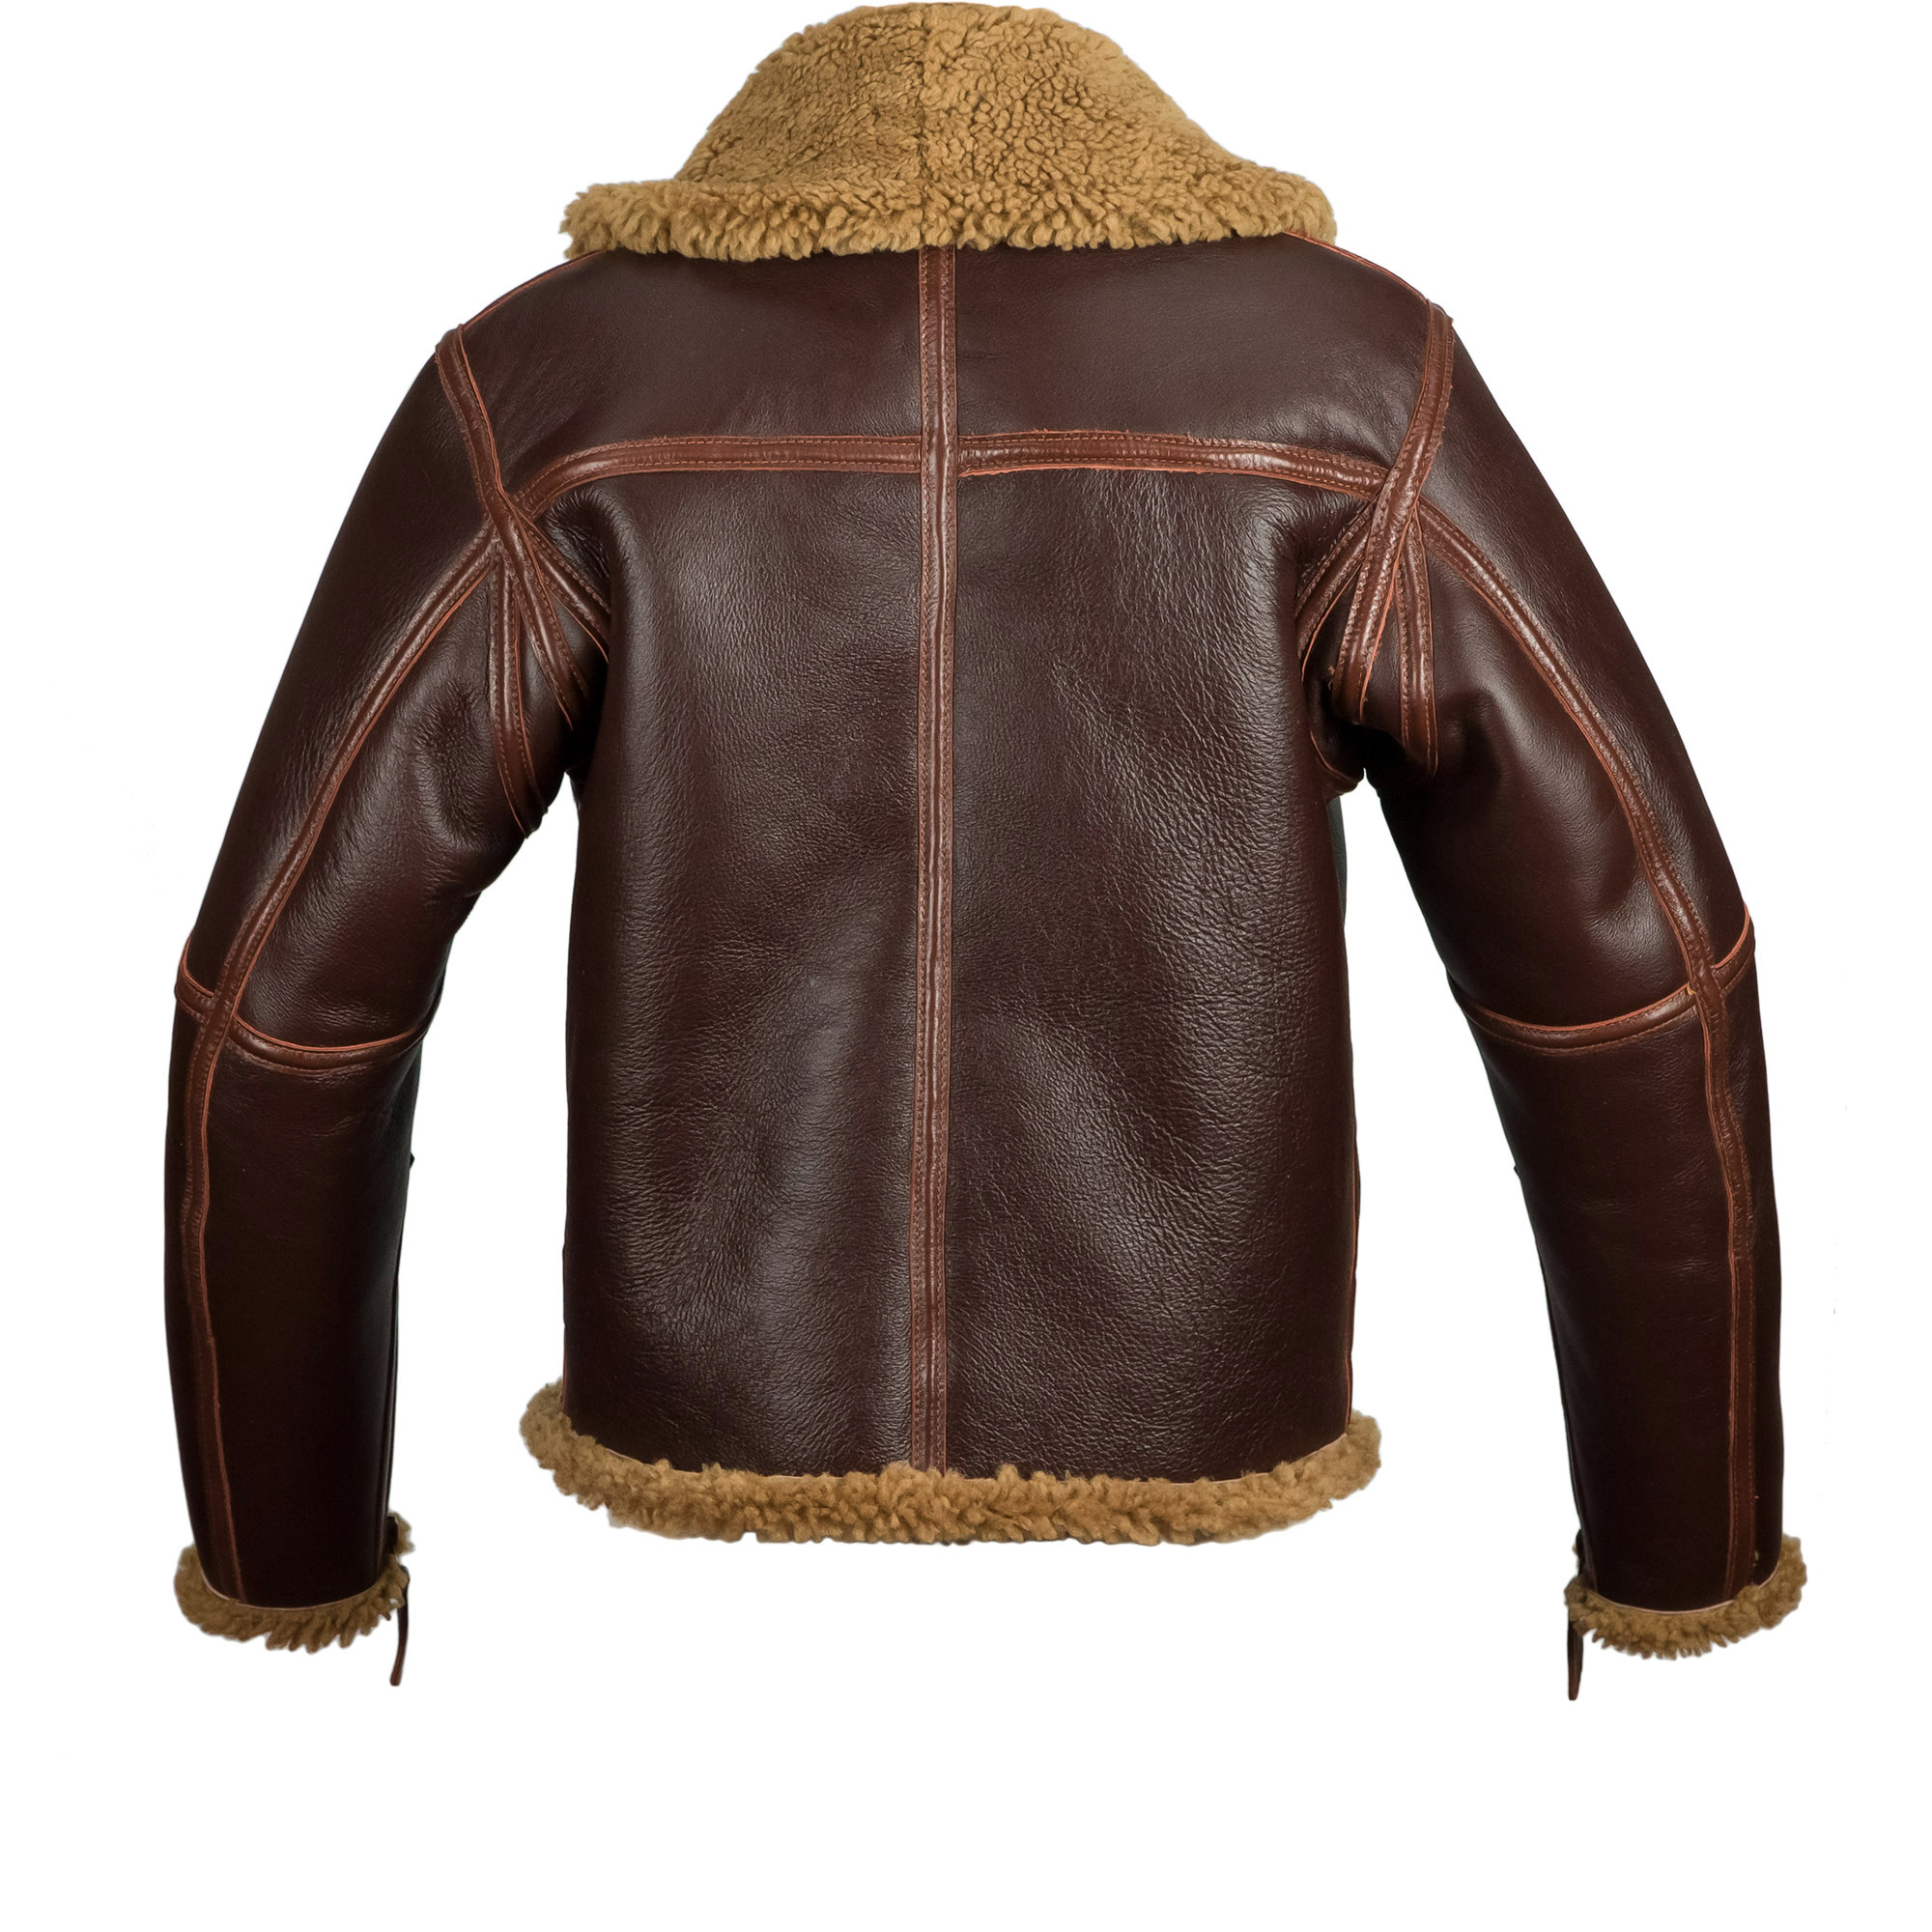 By Popular Demand The Aero RAF Flying Jacket (Irvin) | Vintage Leather ...